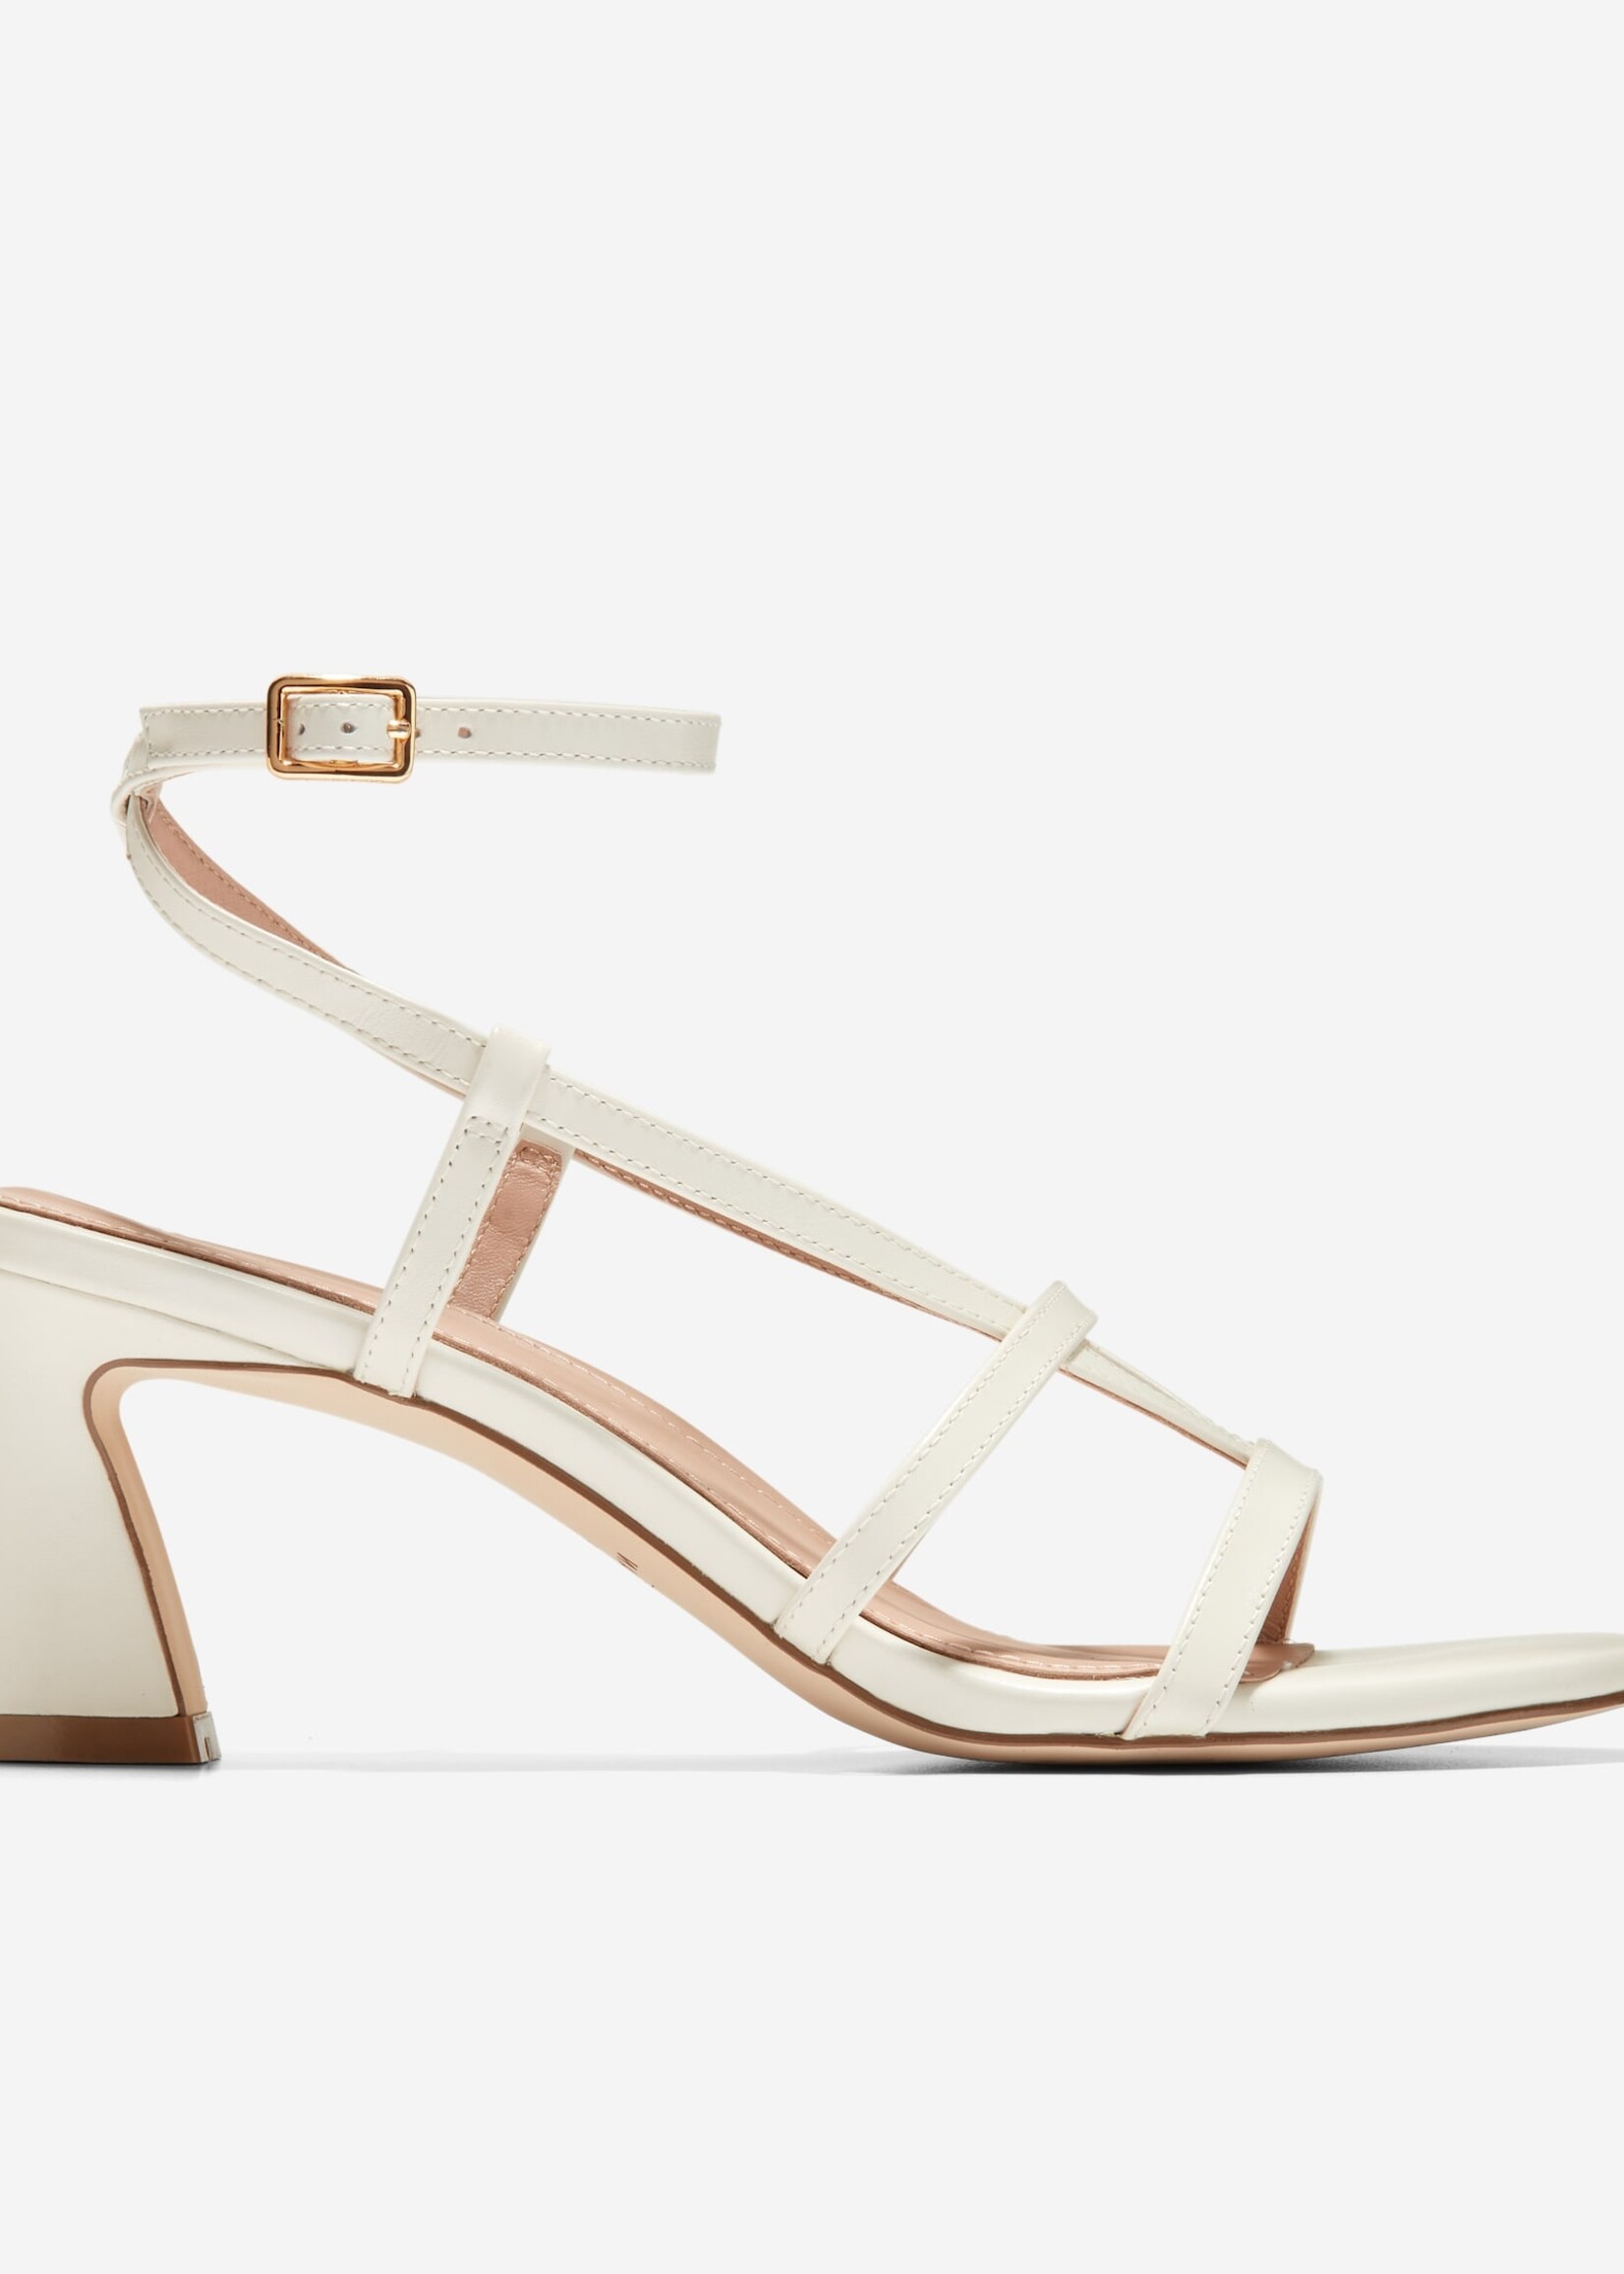 COLE HAAN AMBER STRAPPY SANDAL